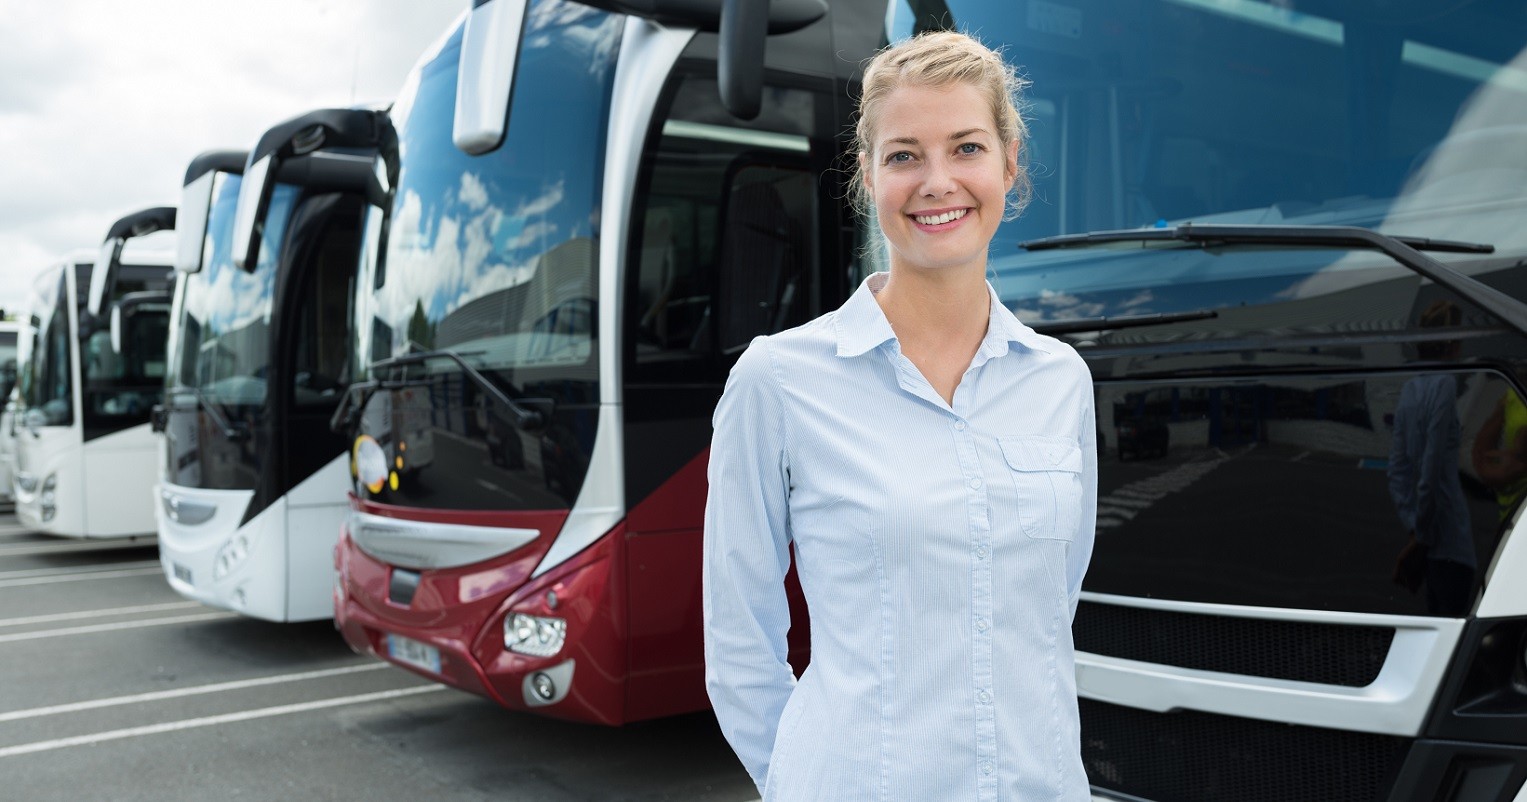 Transportation Companies for Sale Can Offer Lucrative Lifestyle